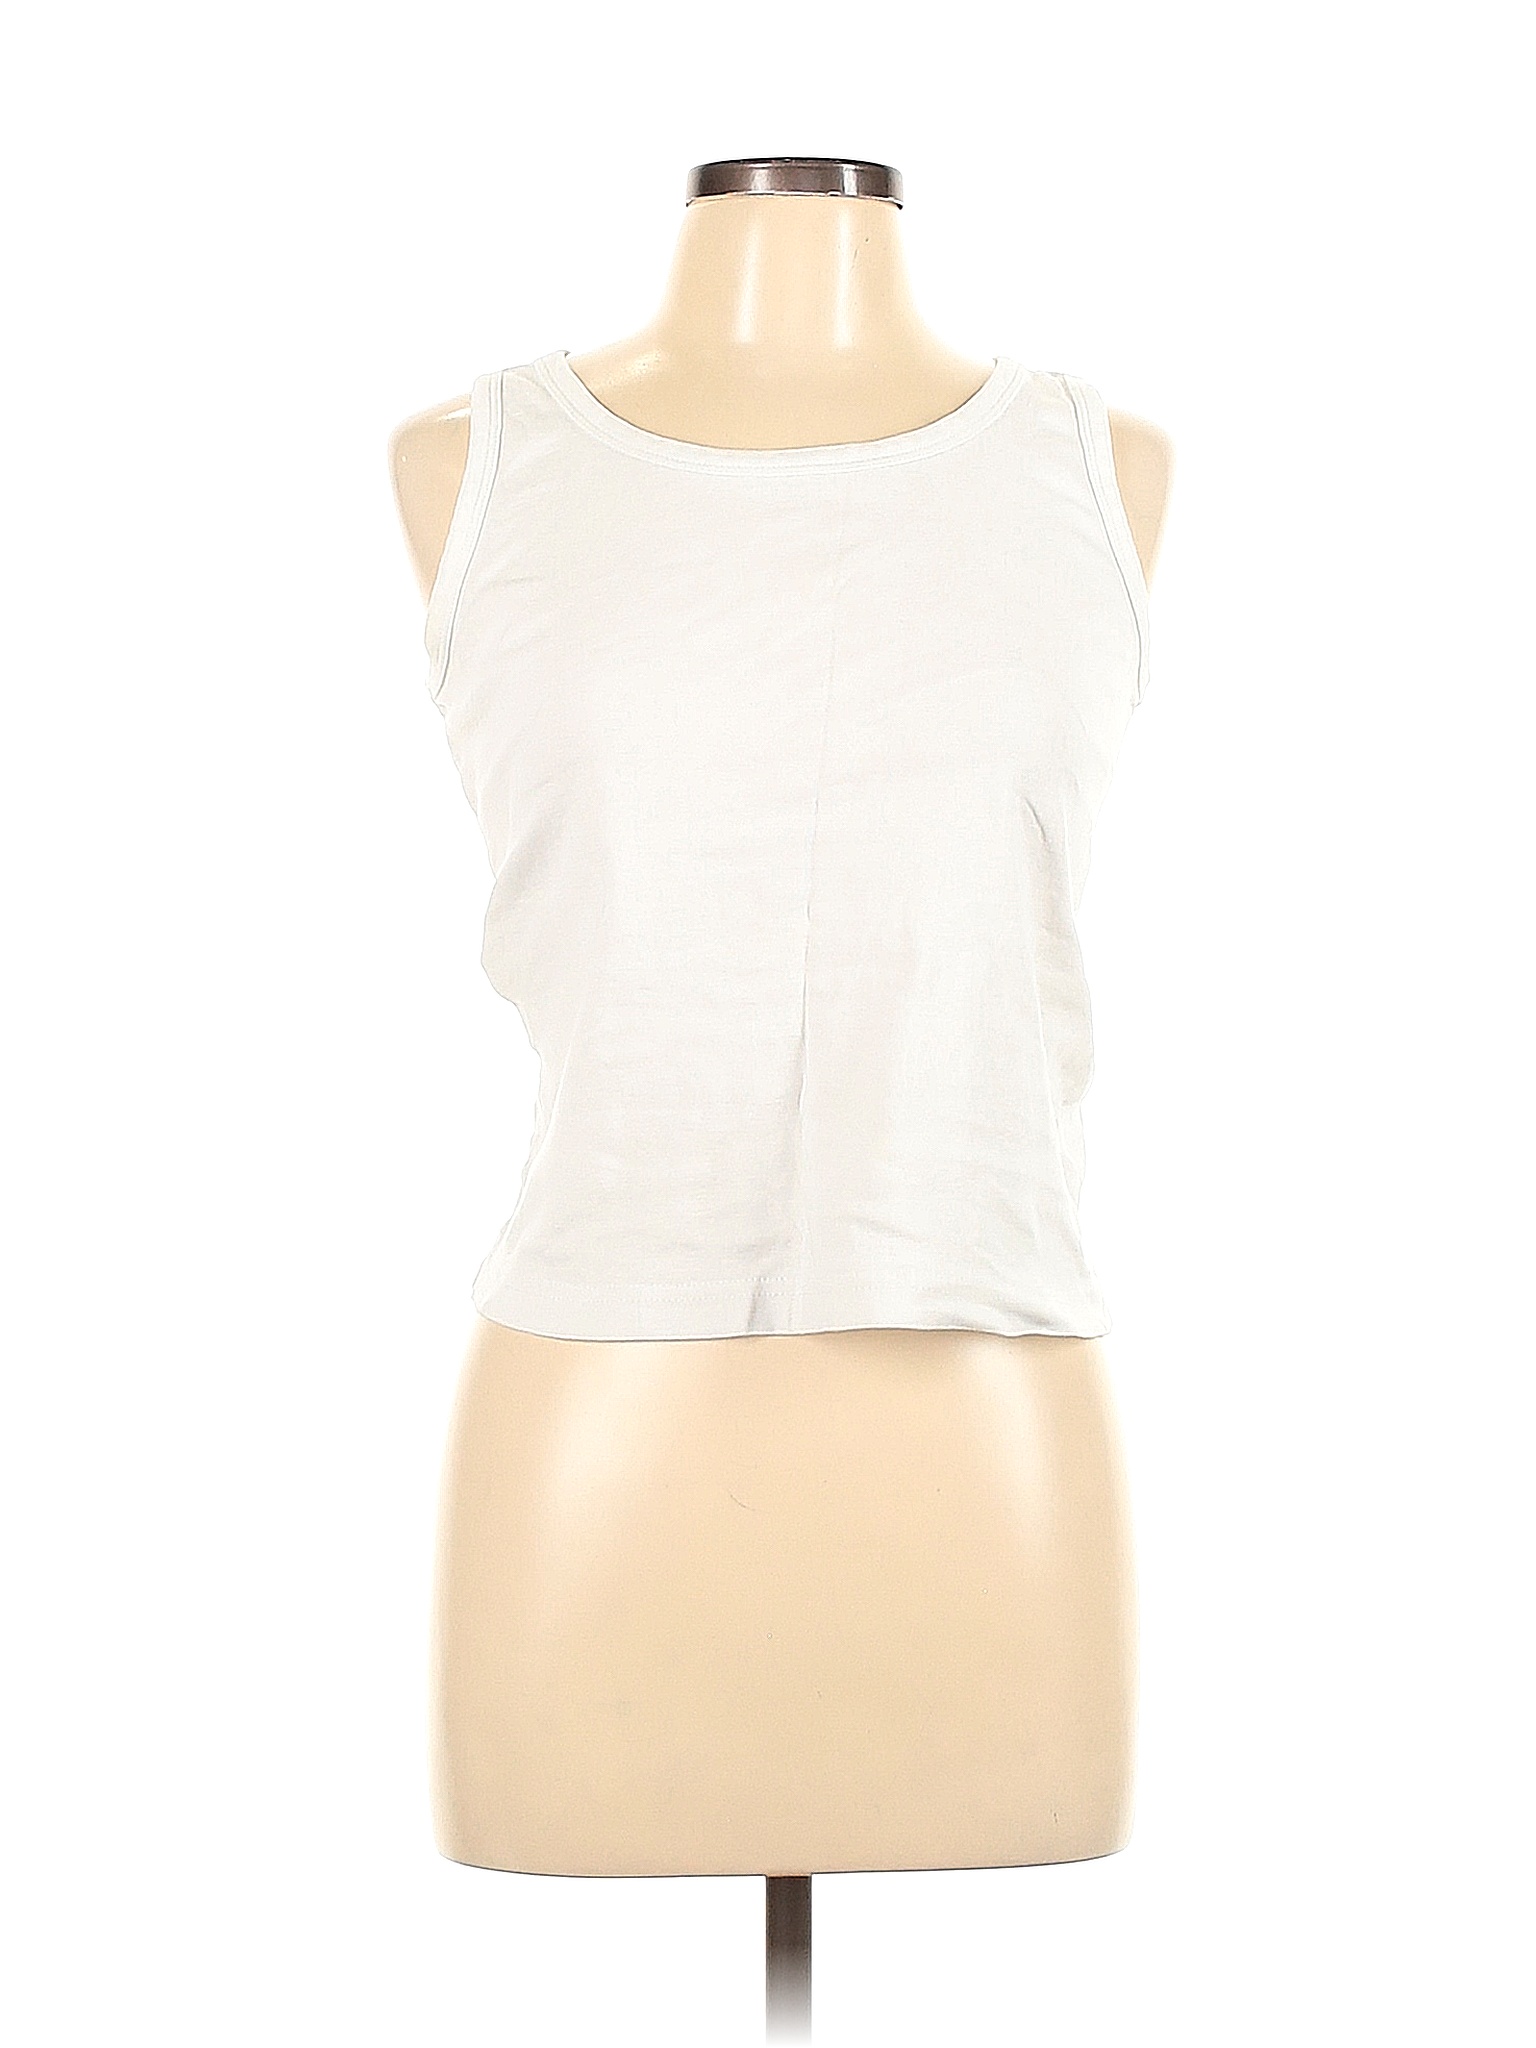 Laura Scott 100% Cotton Solid White Ivory Tank Top Size L - 53% off ...